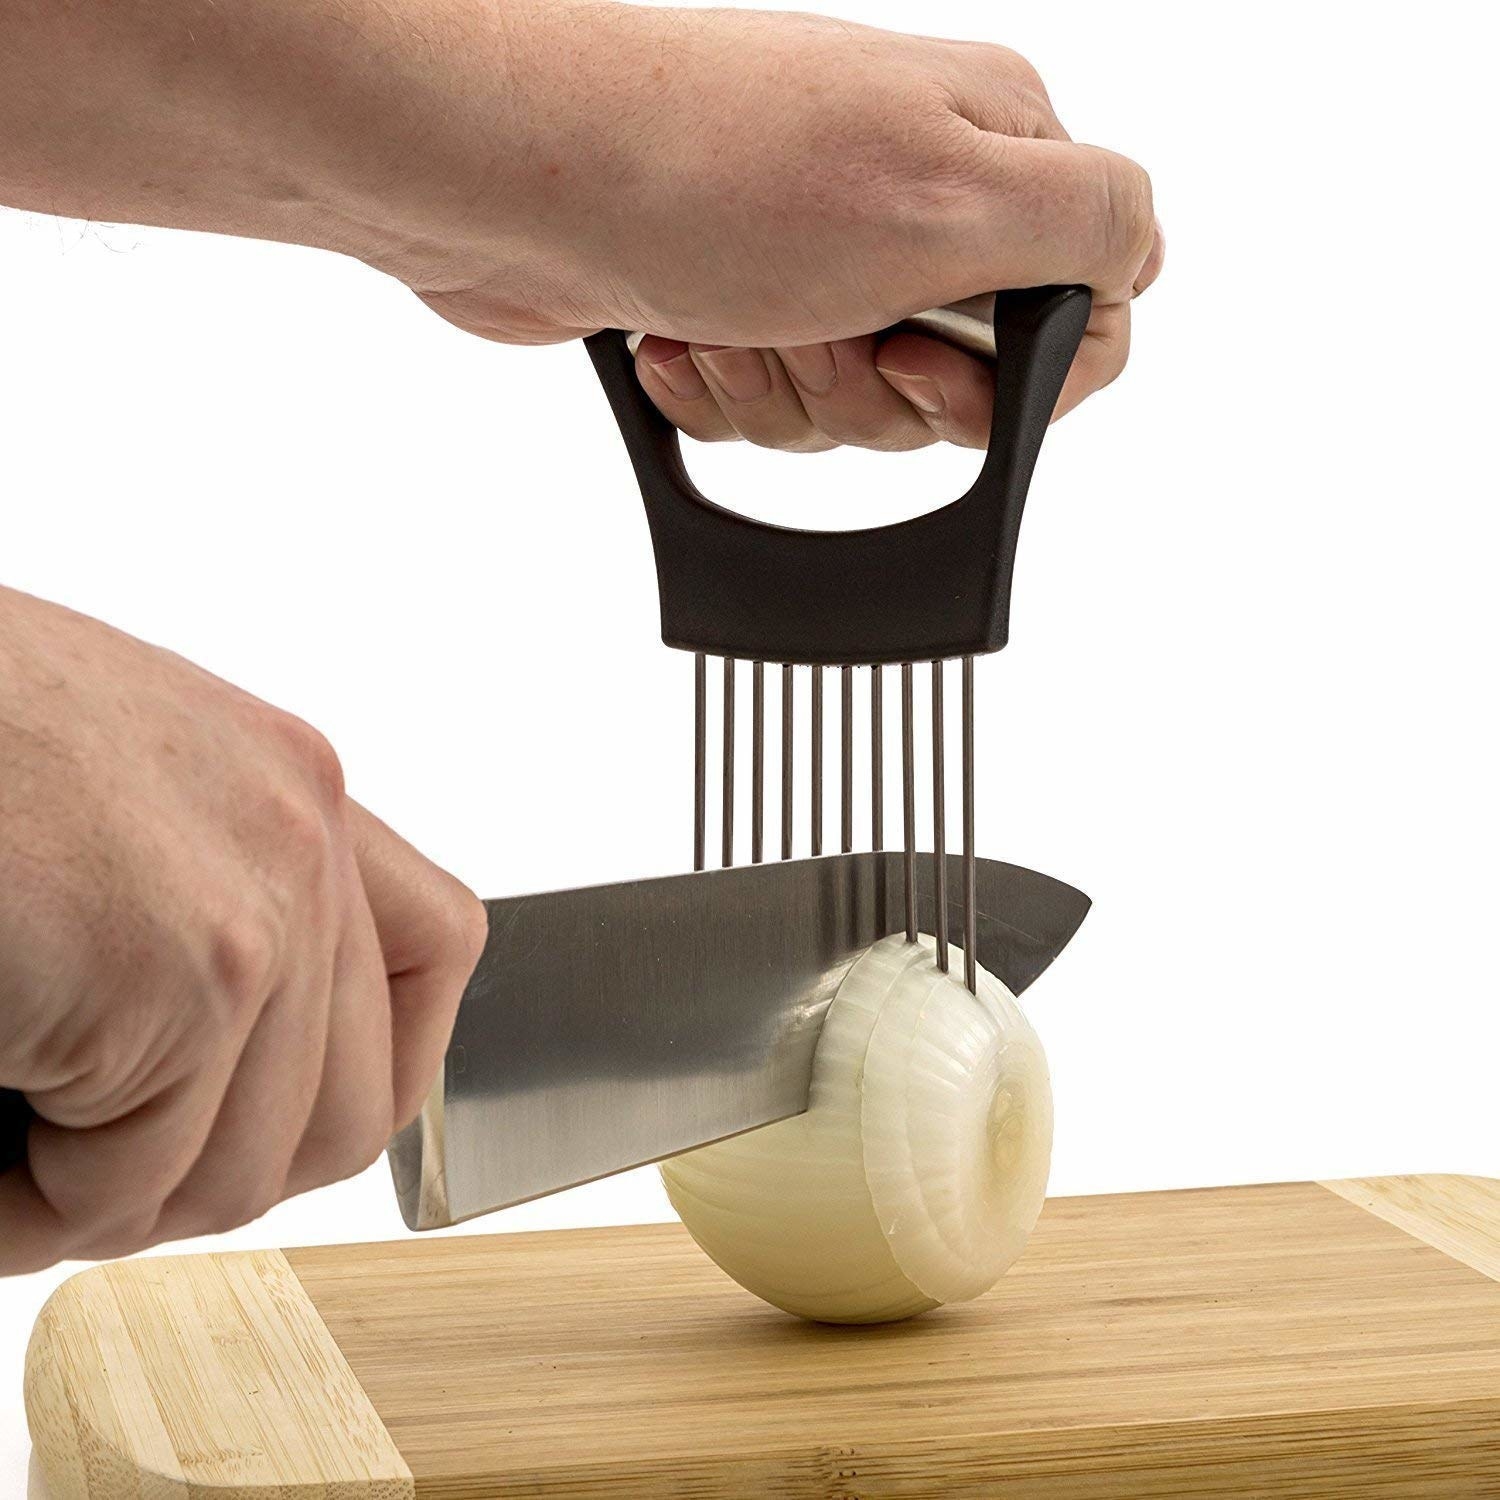 A black vegetable holder being used to cut an onion on a wooden board